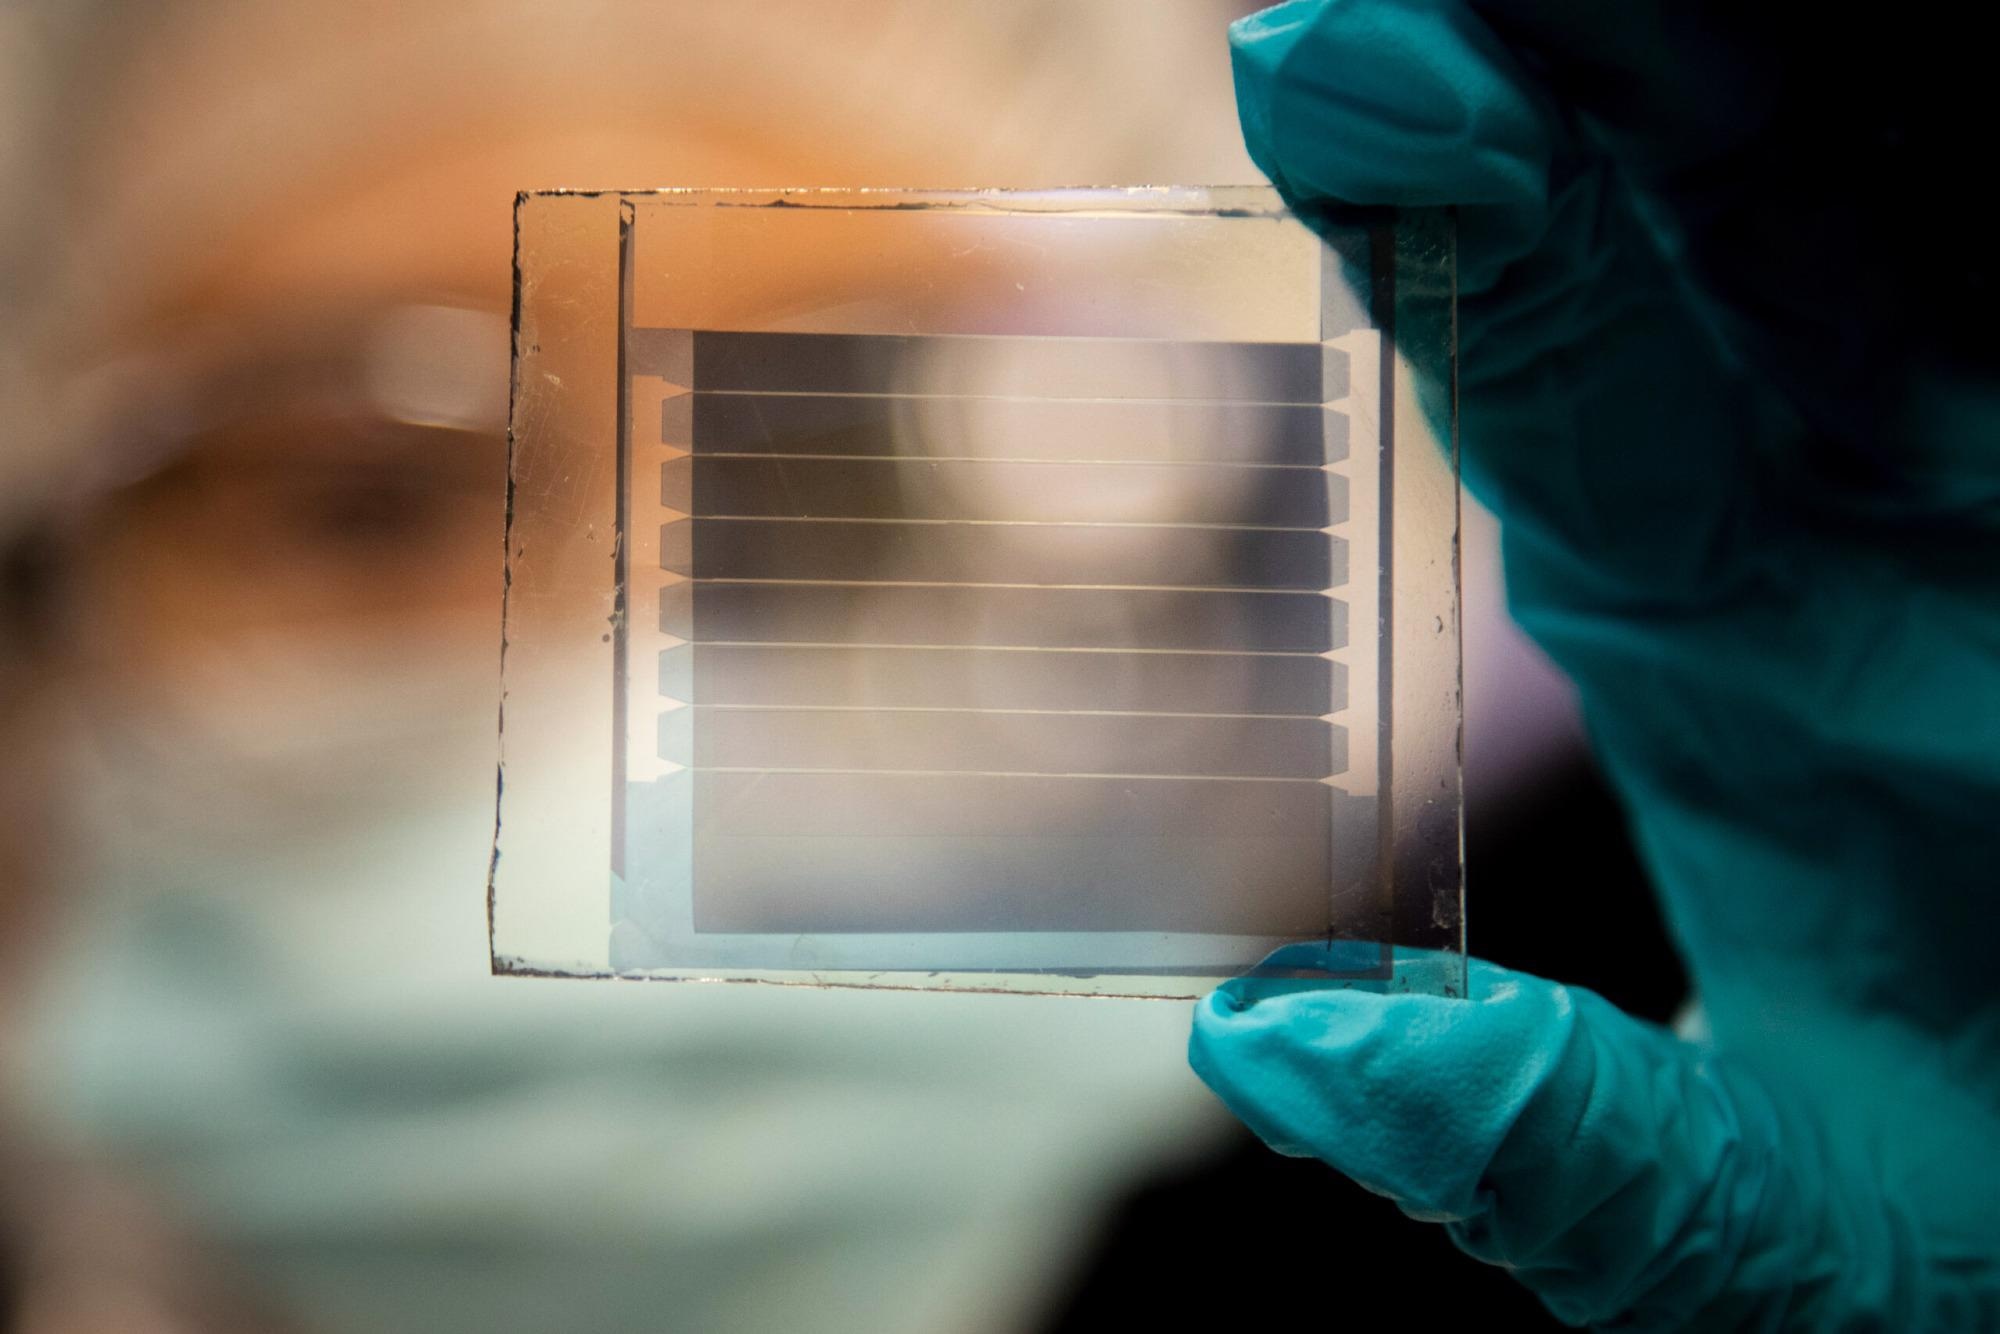 New Long-Lasting Solar Cell Design Could Pave Way for Power-Generating Windows.